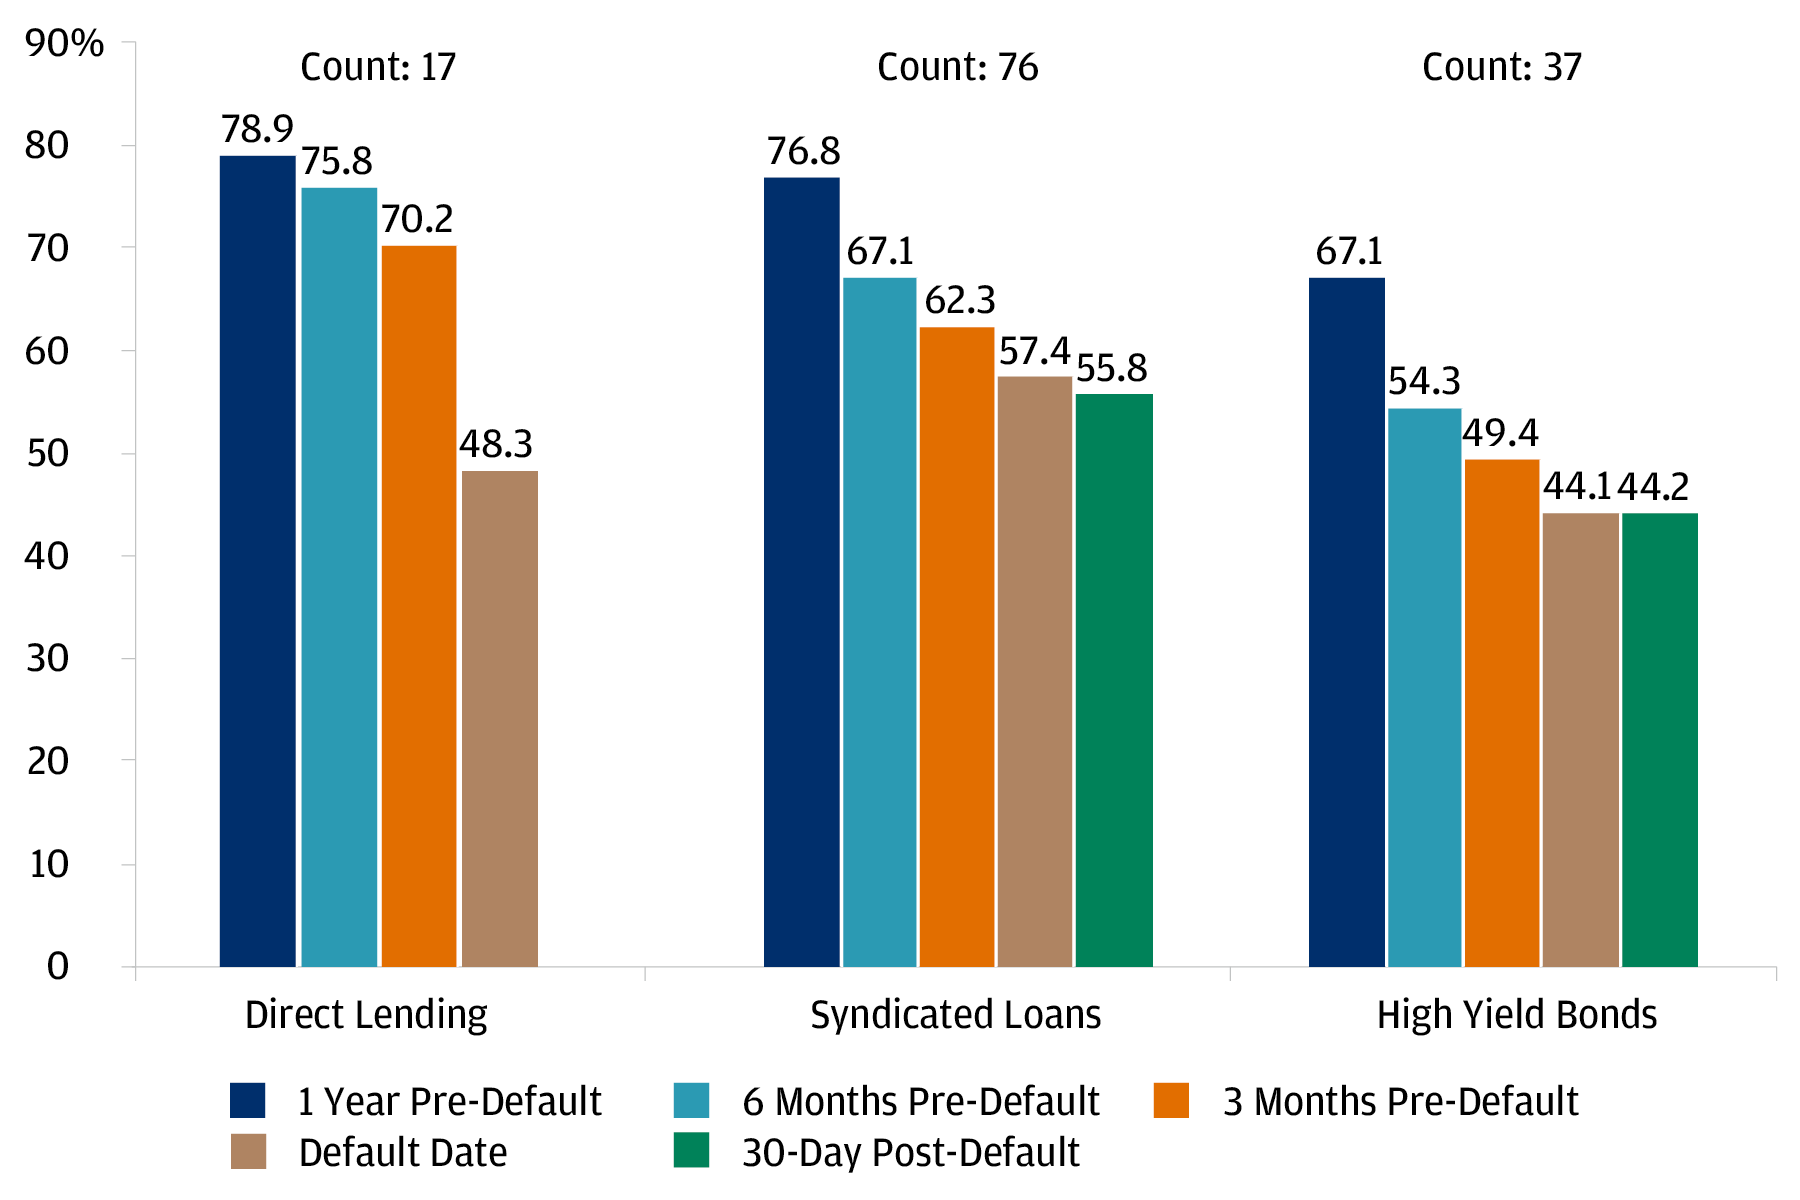 This shows the valuation of direct lending, syndicated loan, and HY bonds in the 12 months leading up to defaults.